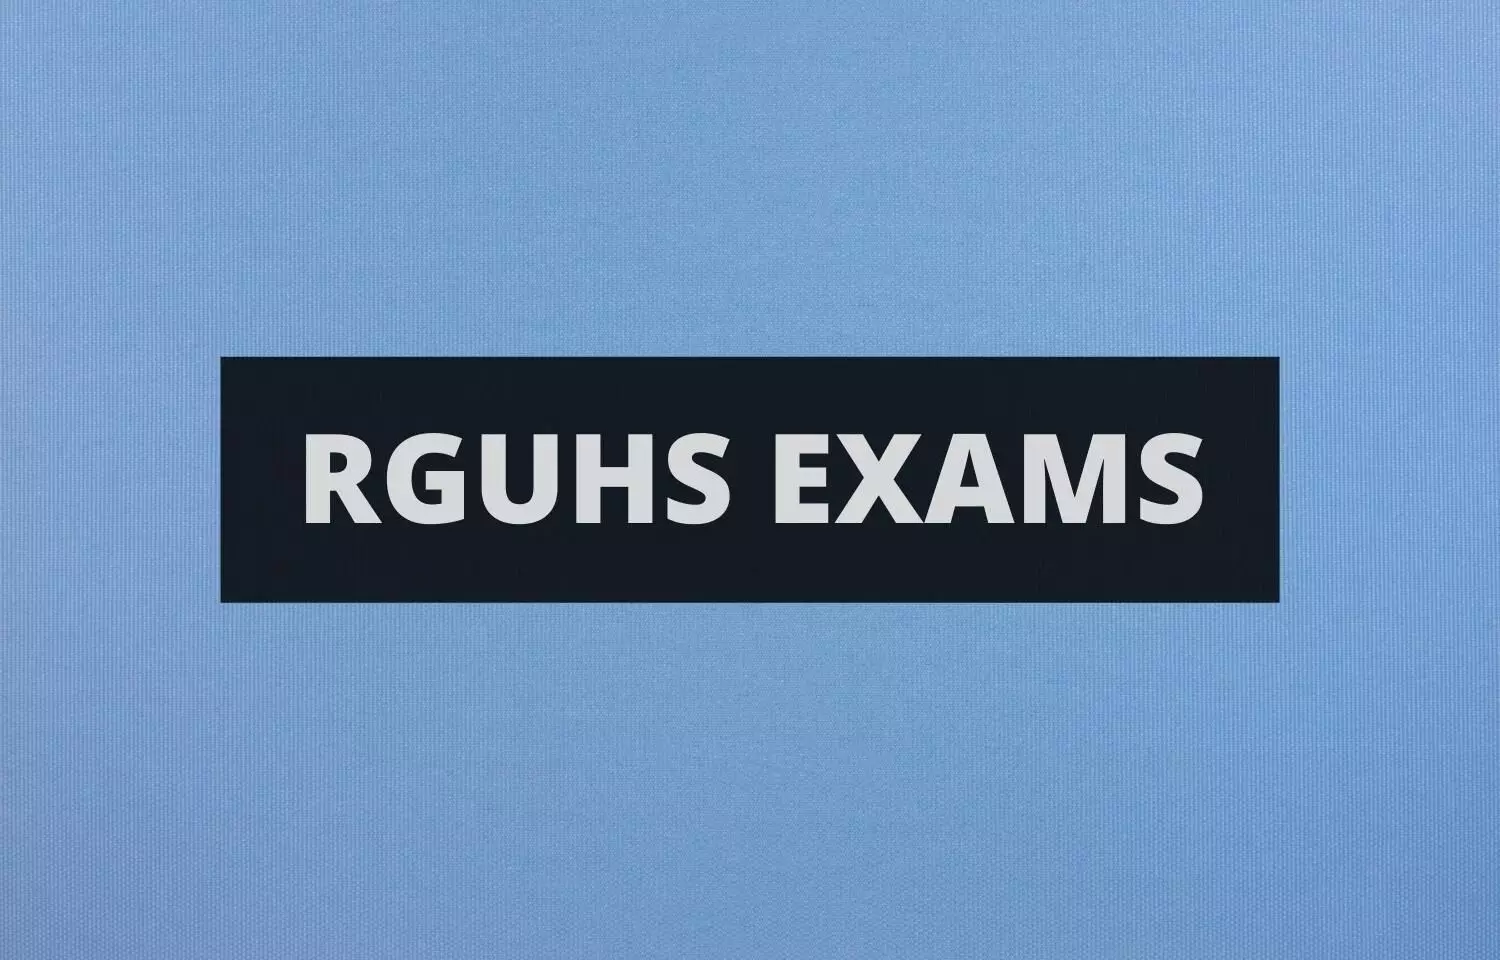 RGUHS releases conduct for AYUSH Exams June 2022, Check out schedule, fee details